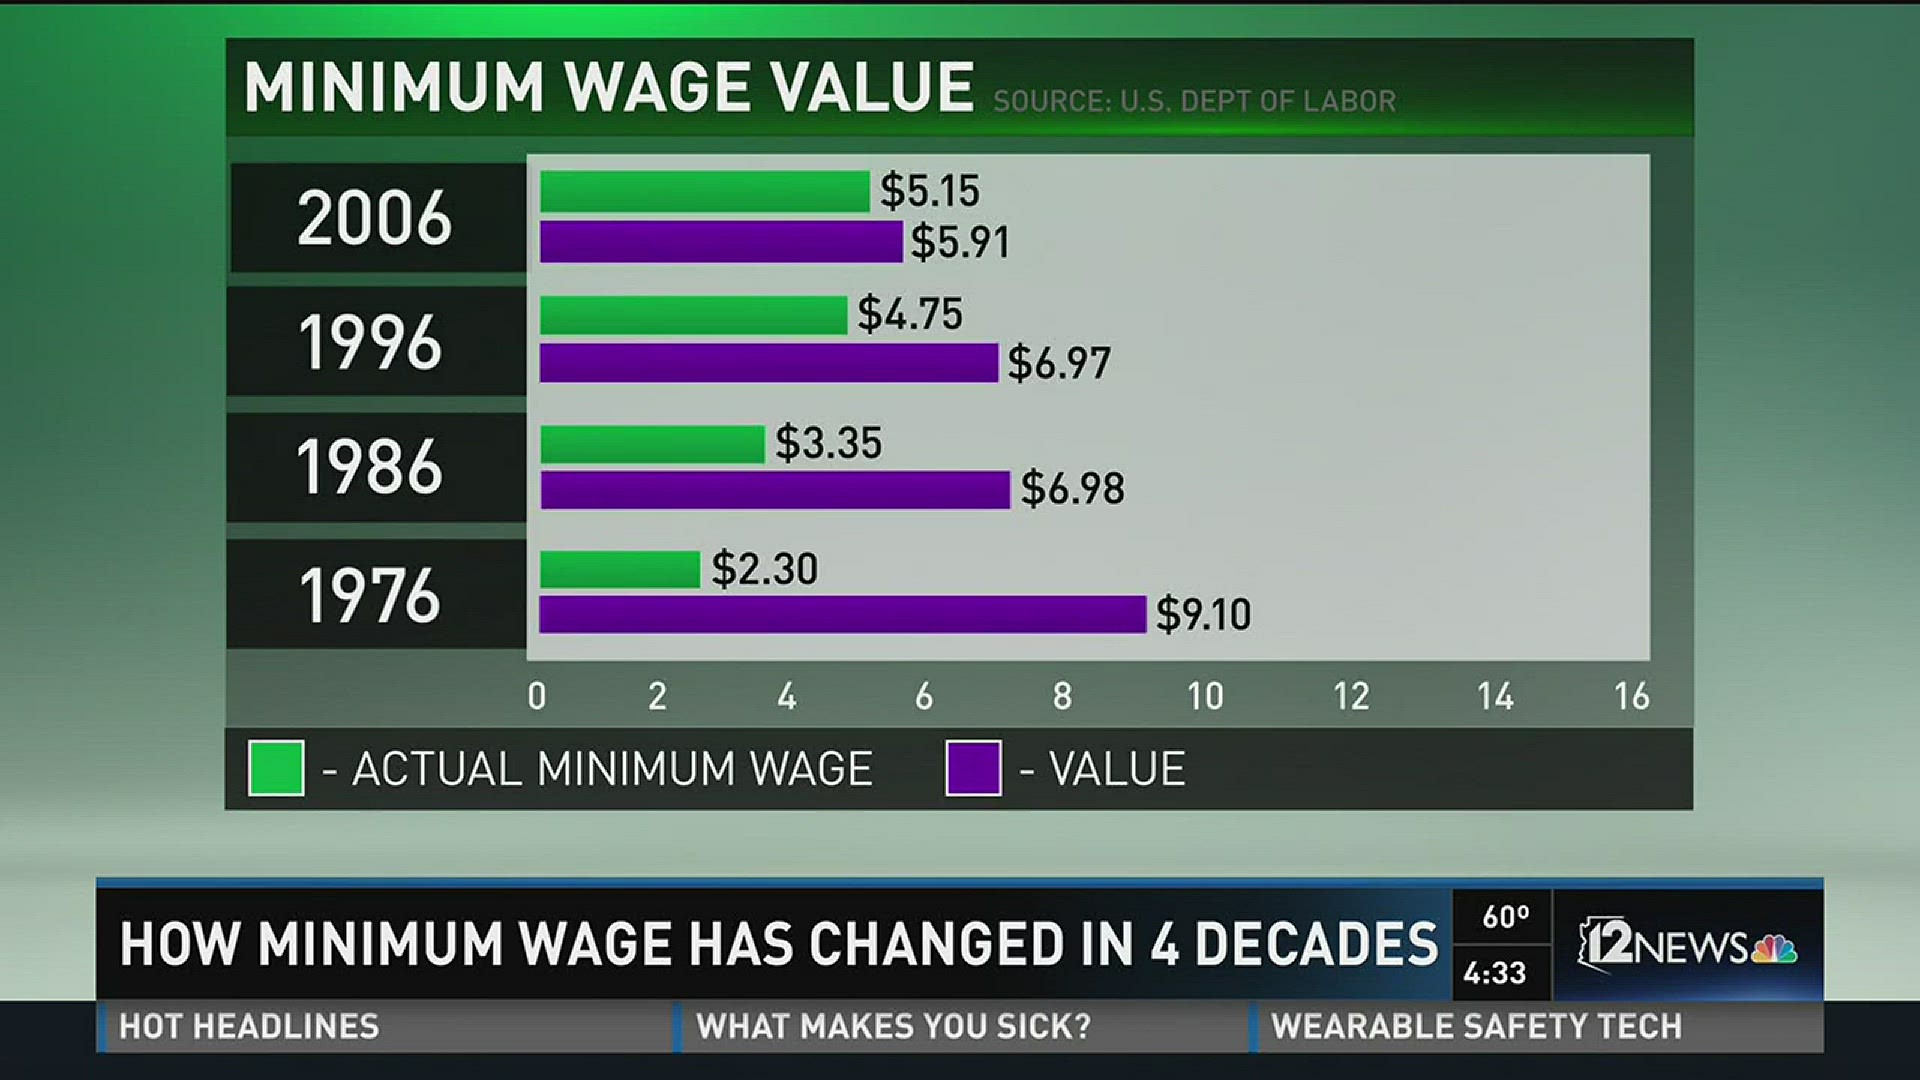 The minimum wage value change over 40 years.